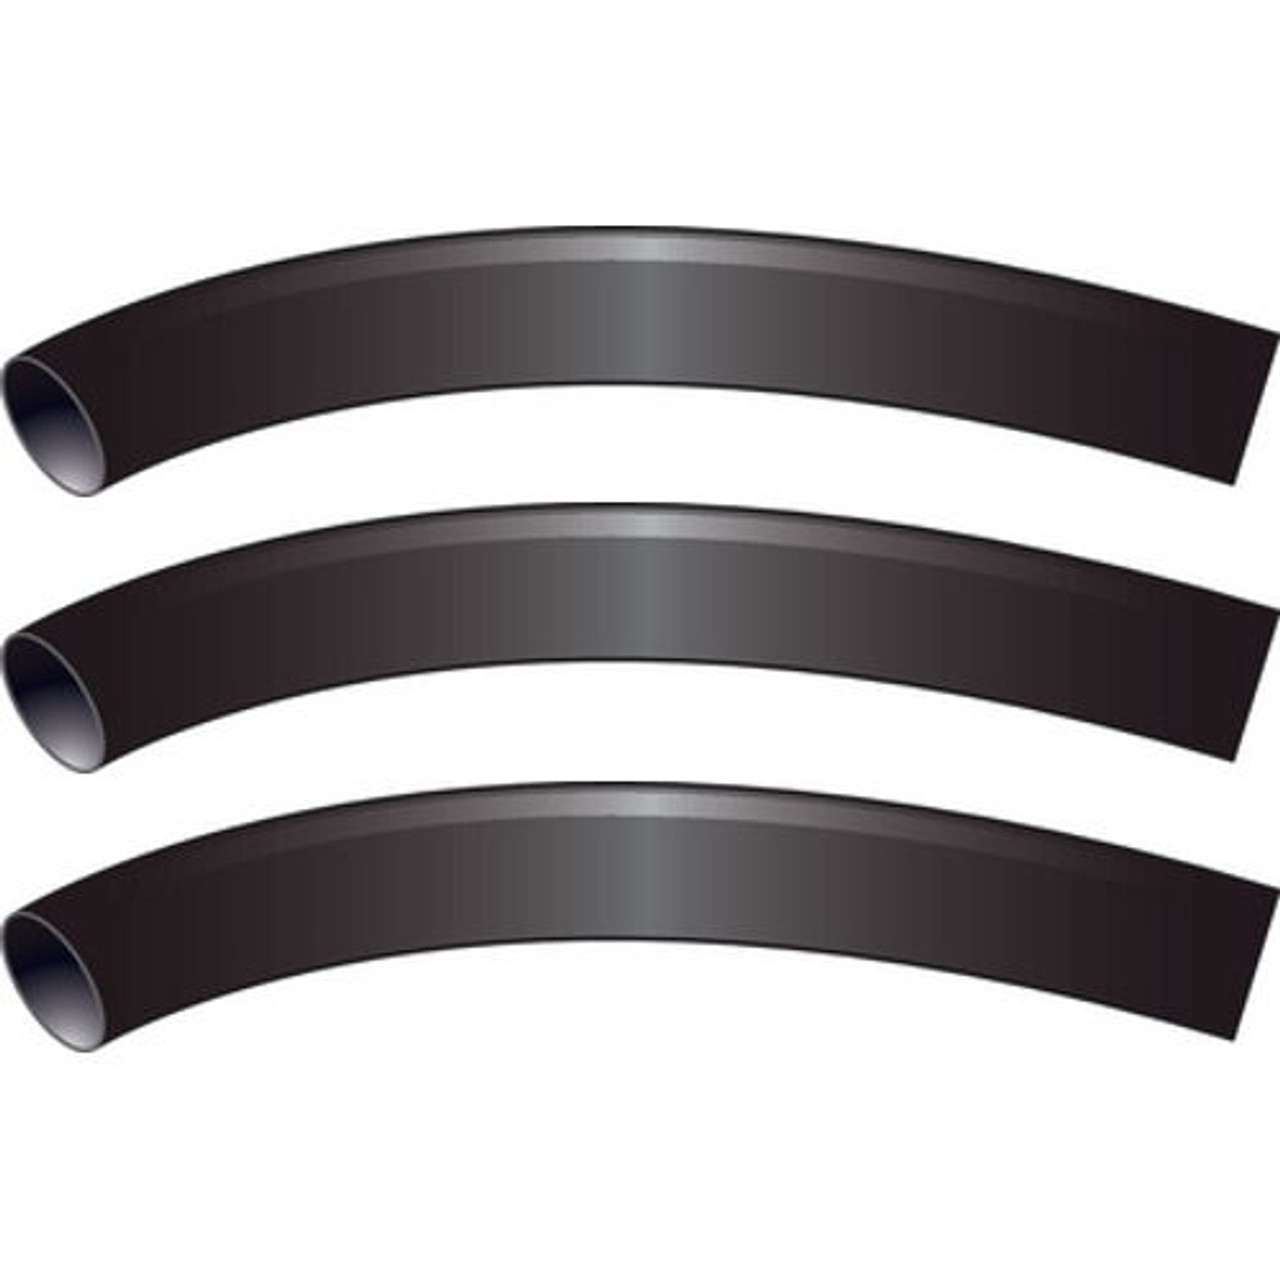 3 Pack of Black 3/4 Inch x 3 Inch 3:1 Heat Shrink Tubing with Sealant for Boats